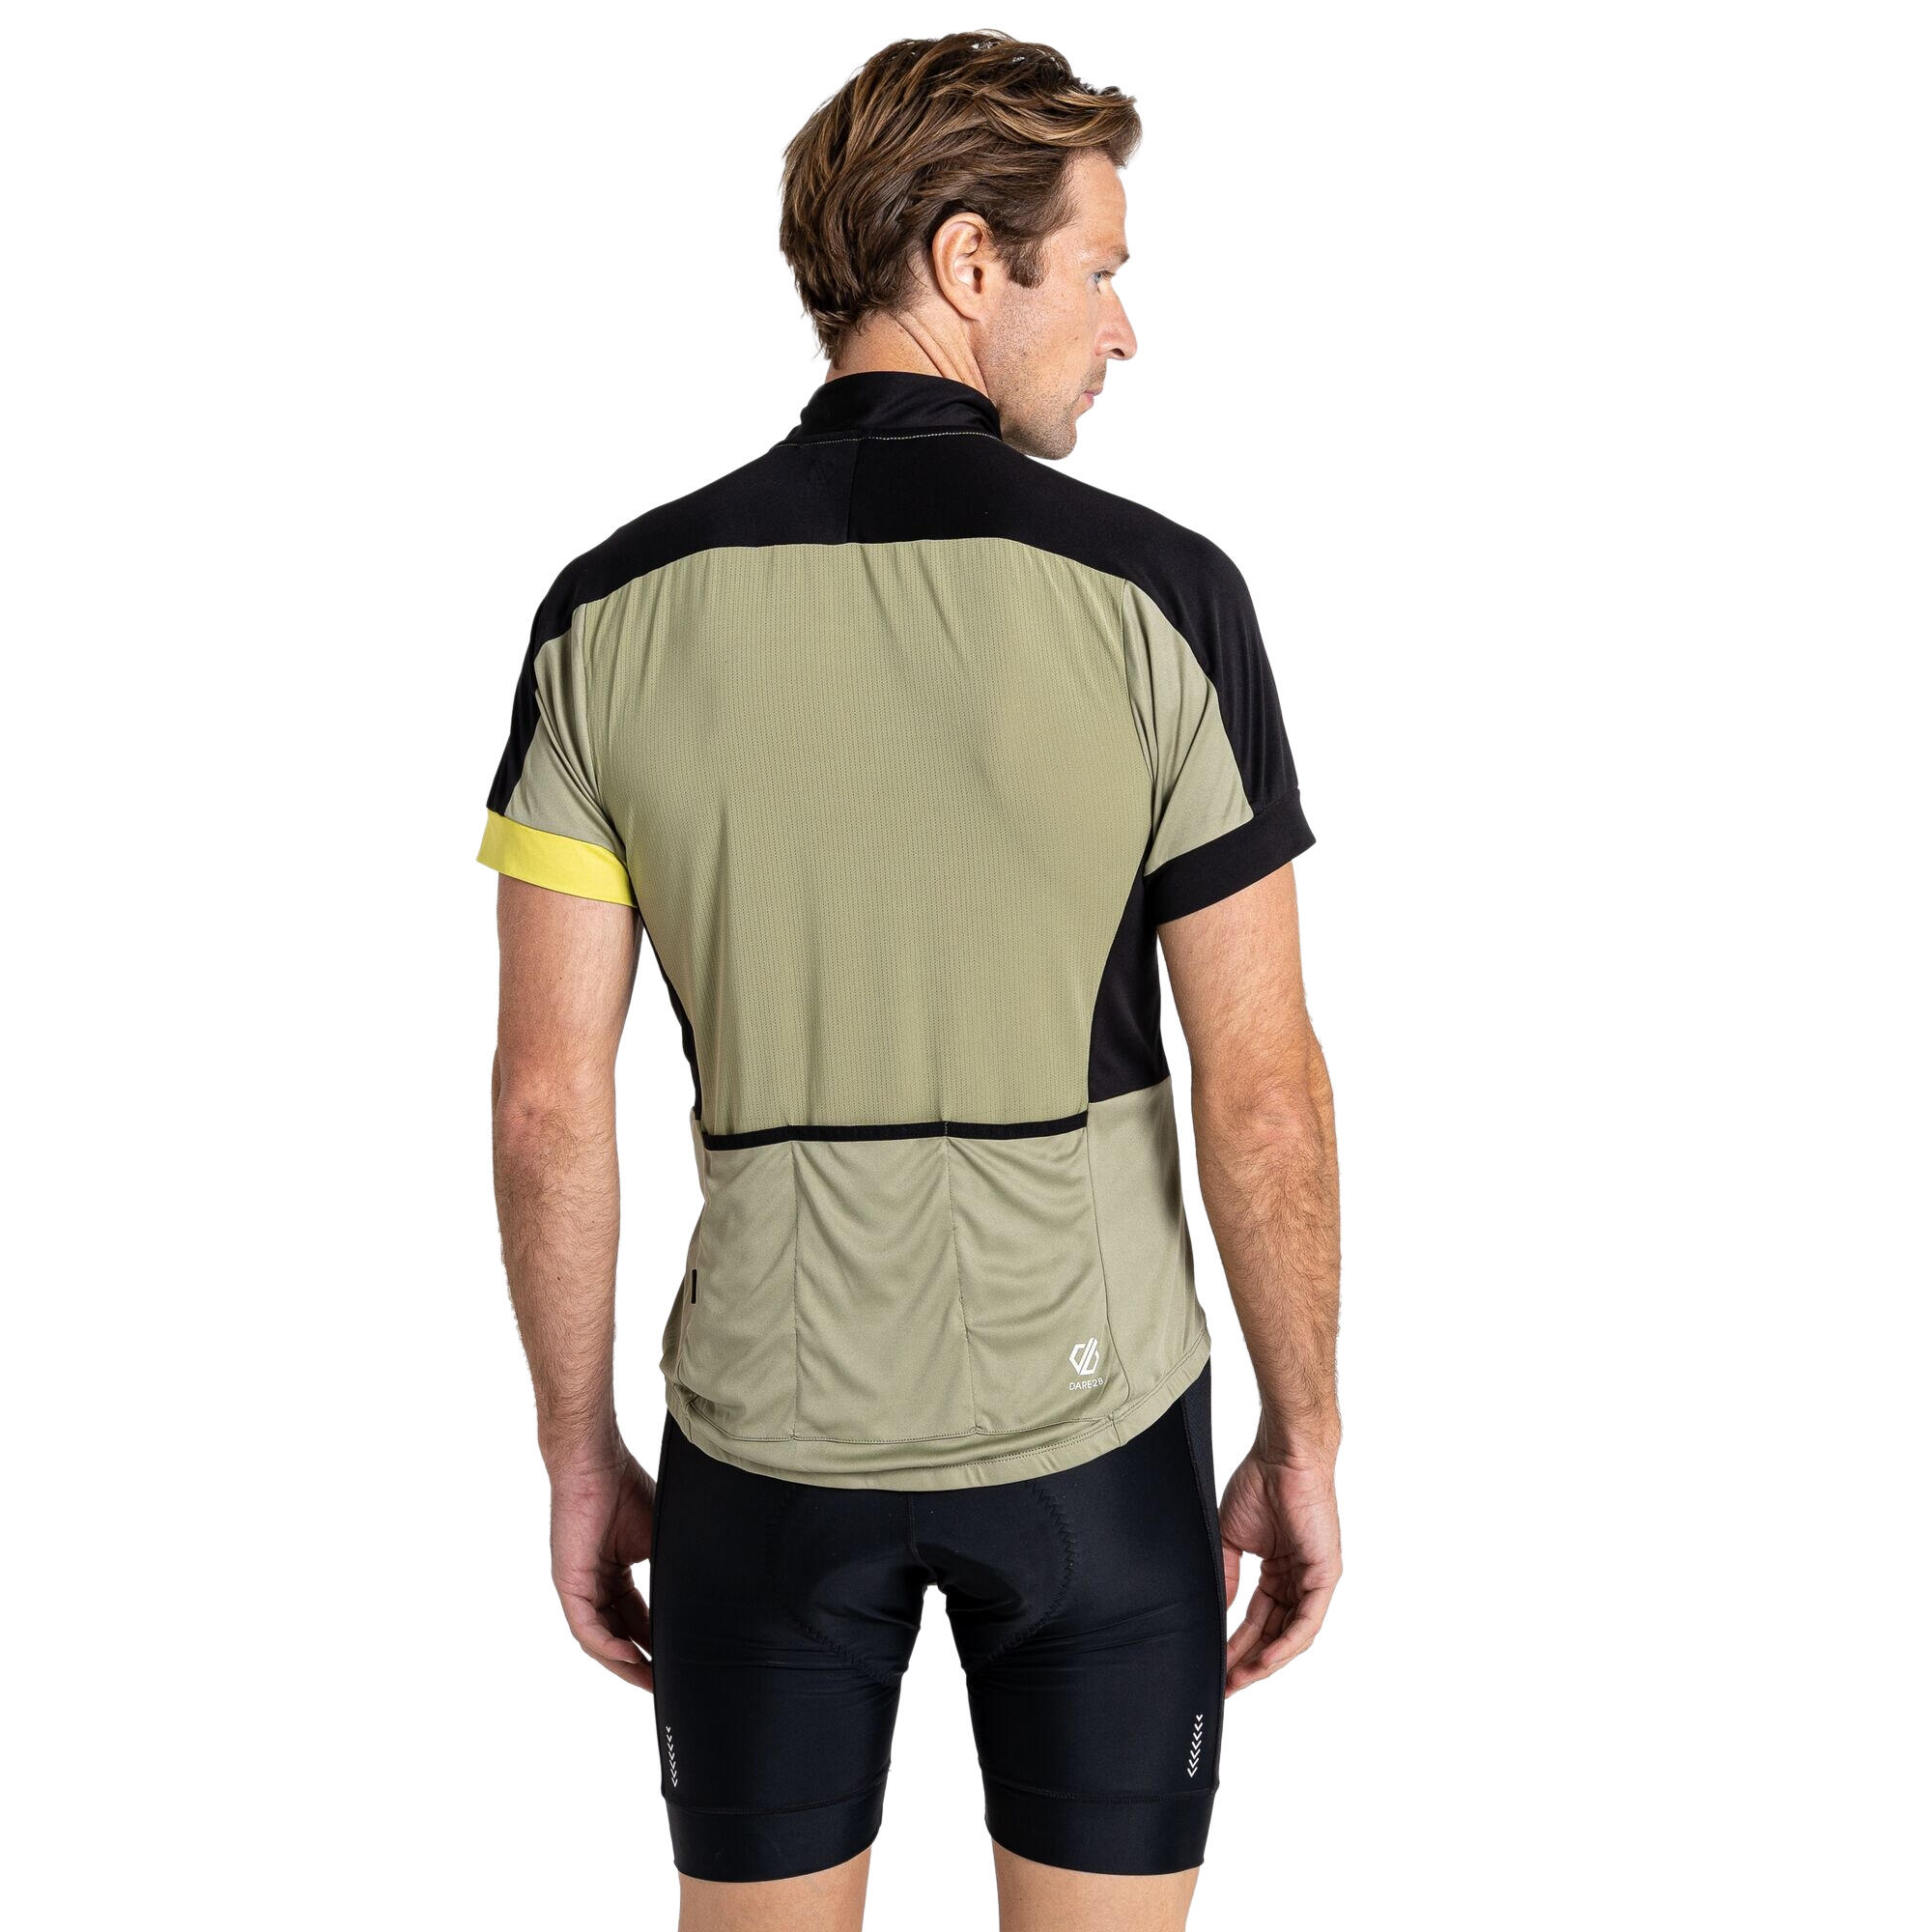 Mens Protraction II Recycled Lightweight Jersey (Oil Green/Black) 4/5